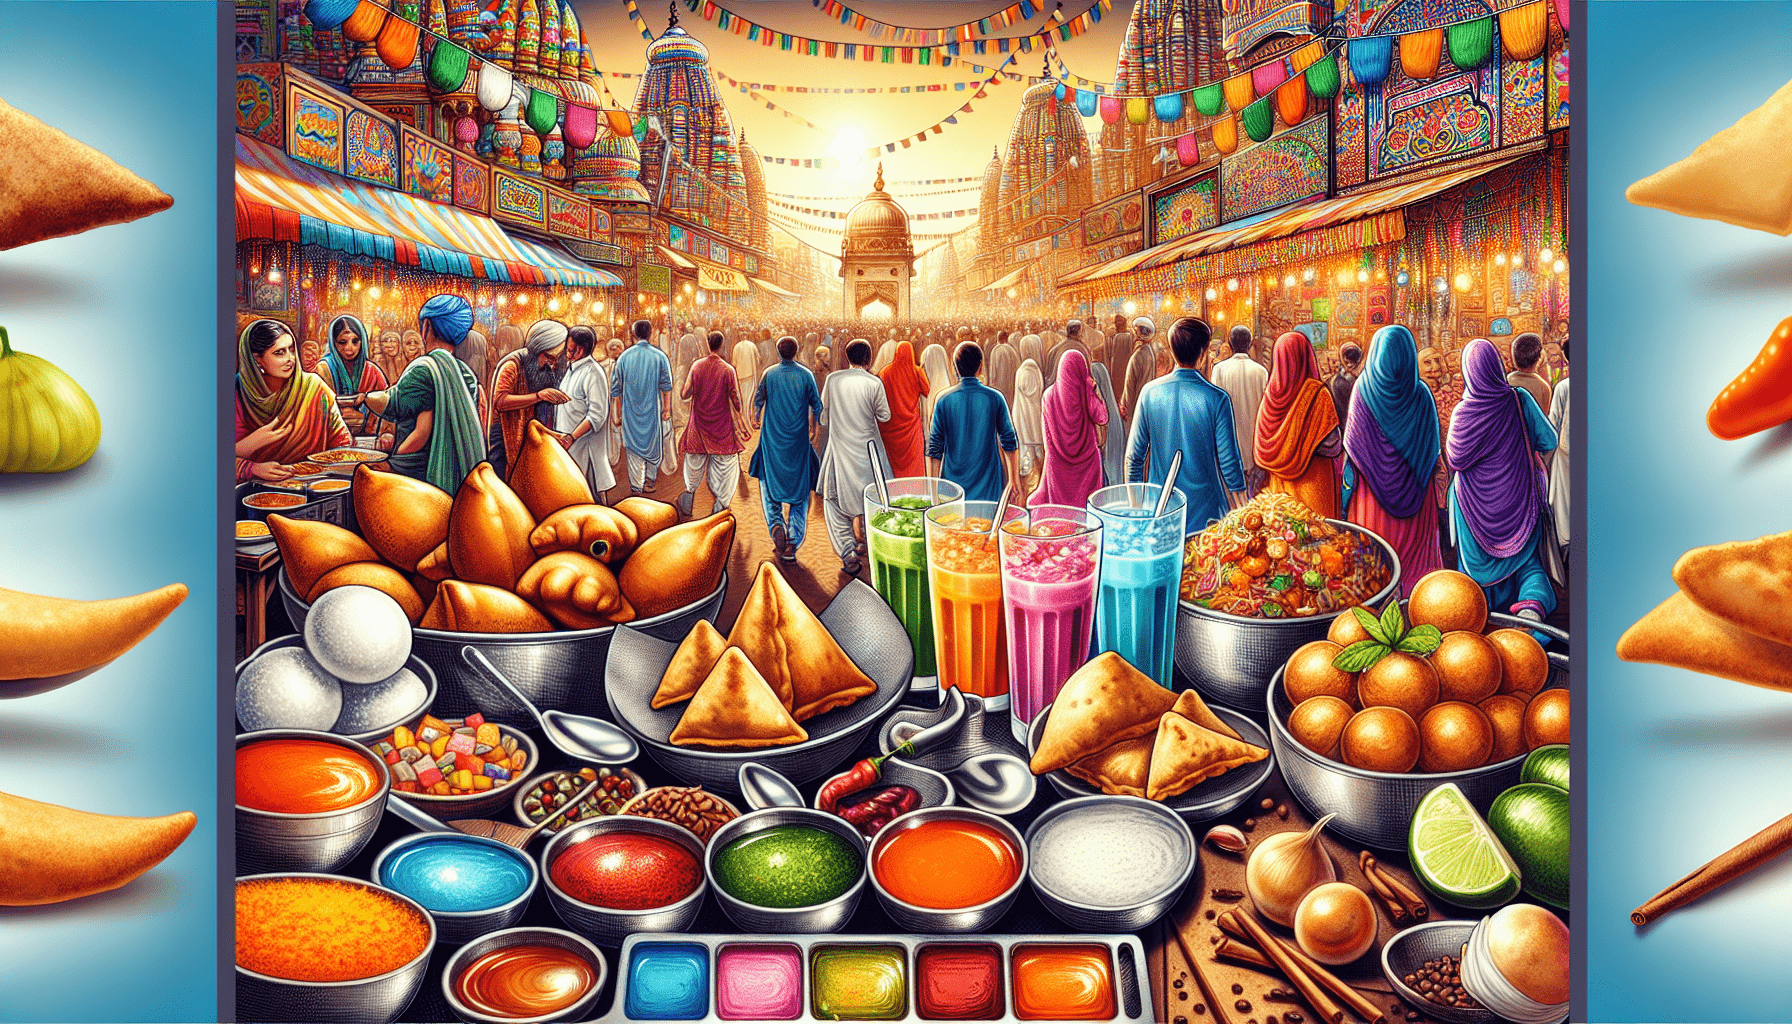 Whats Your Quick And Easy Recipe For A Taste Of Indian Street Food?